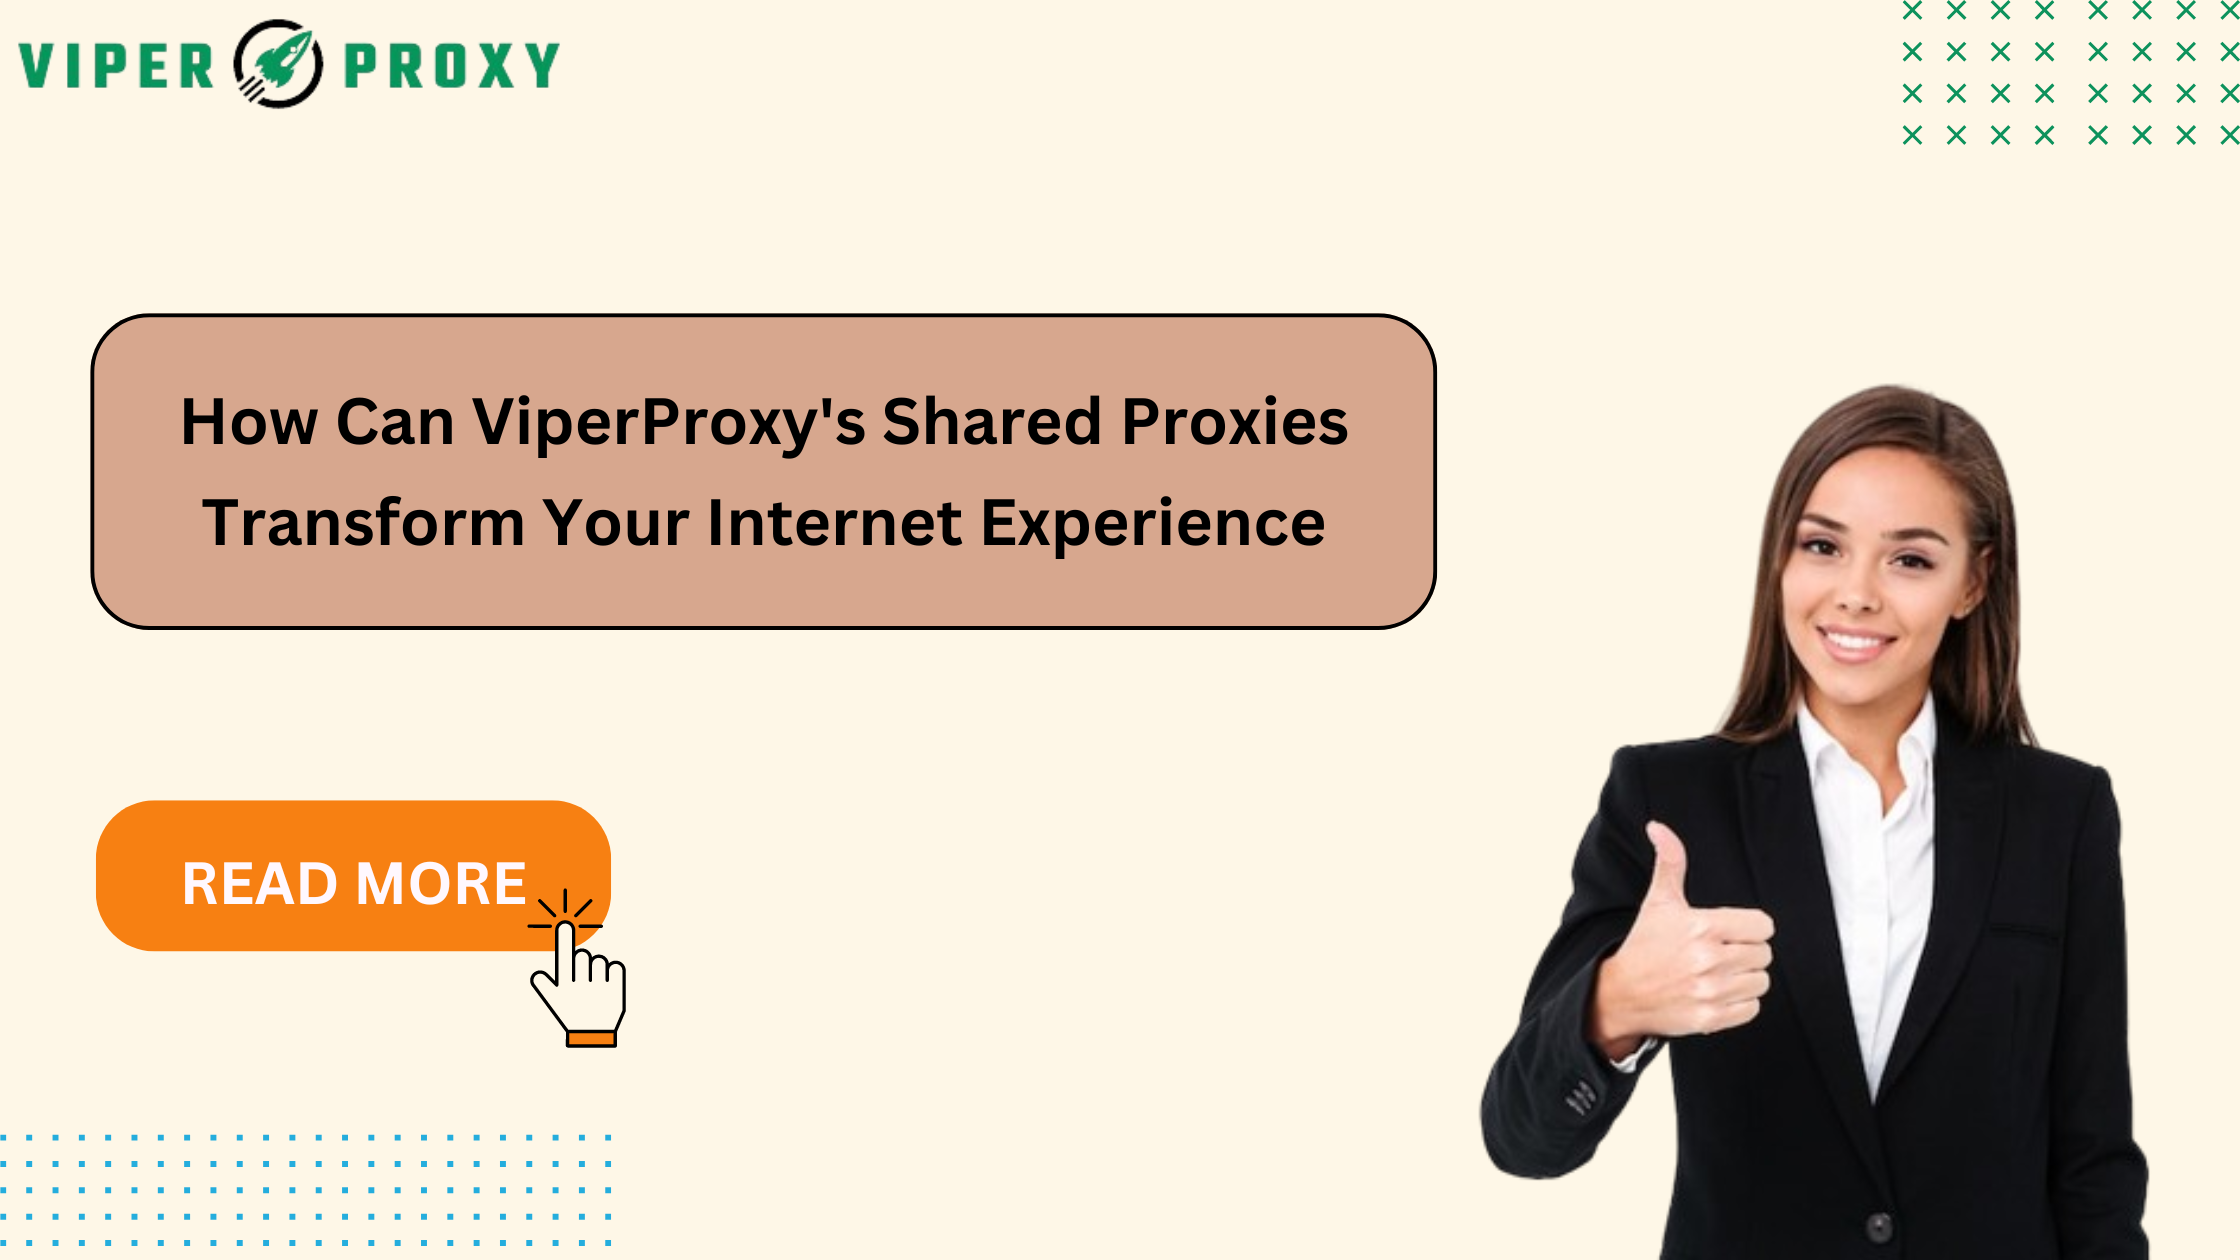 How Can ViperProxy’s Shared Proxies Transform Your Internet Experience